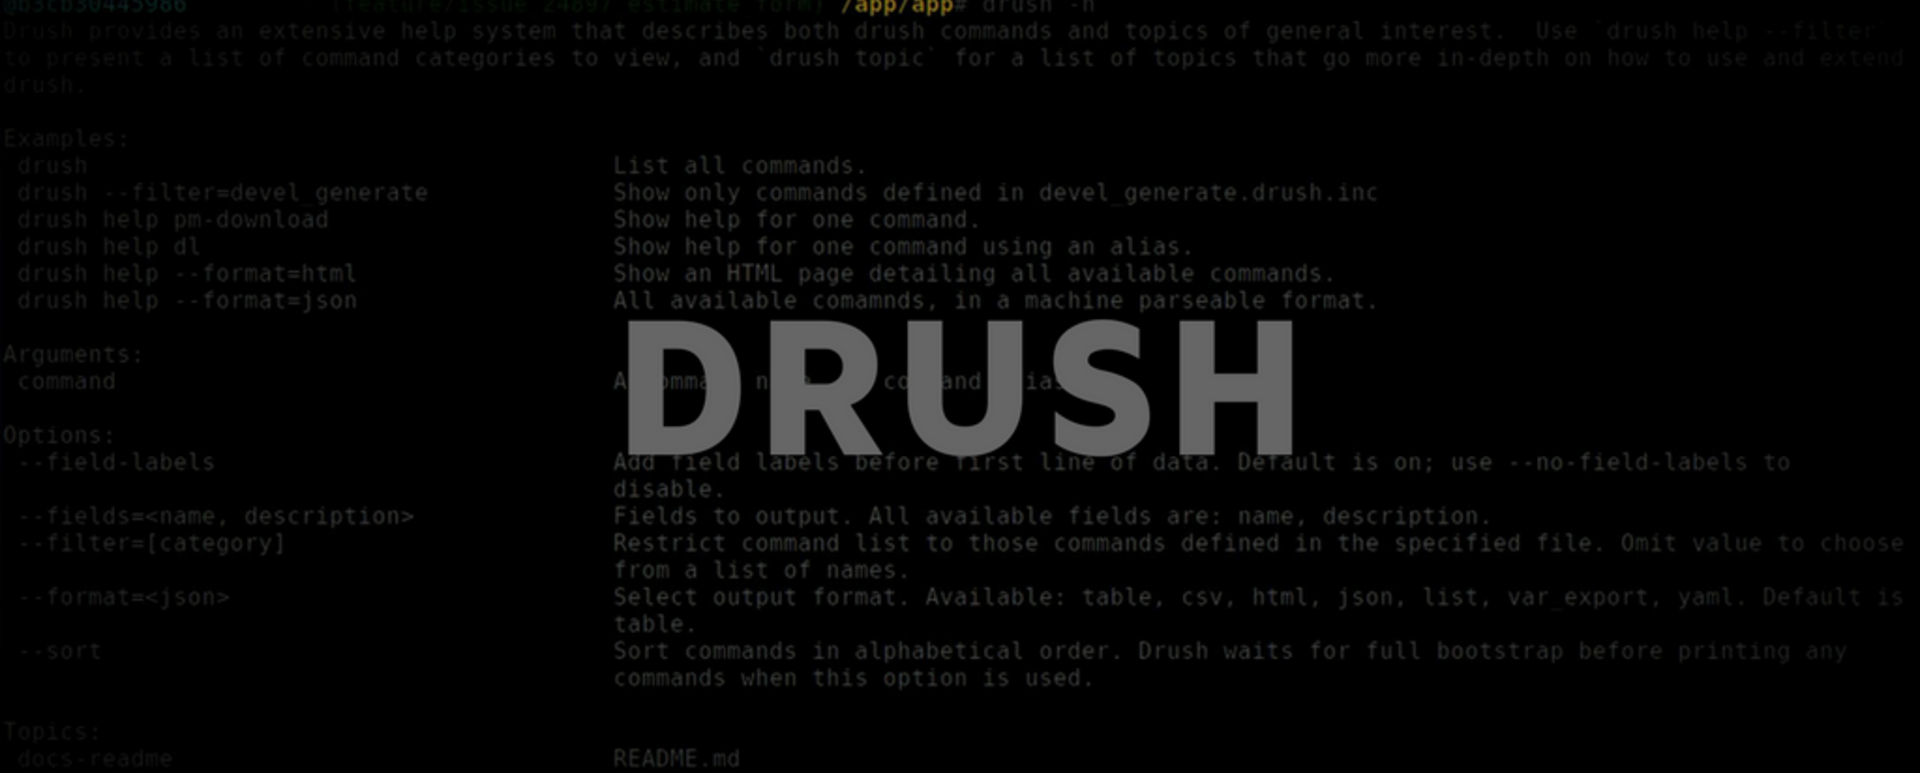 Text "Drush" visible on the background made from drush screenshot